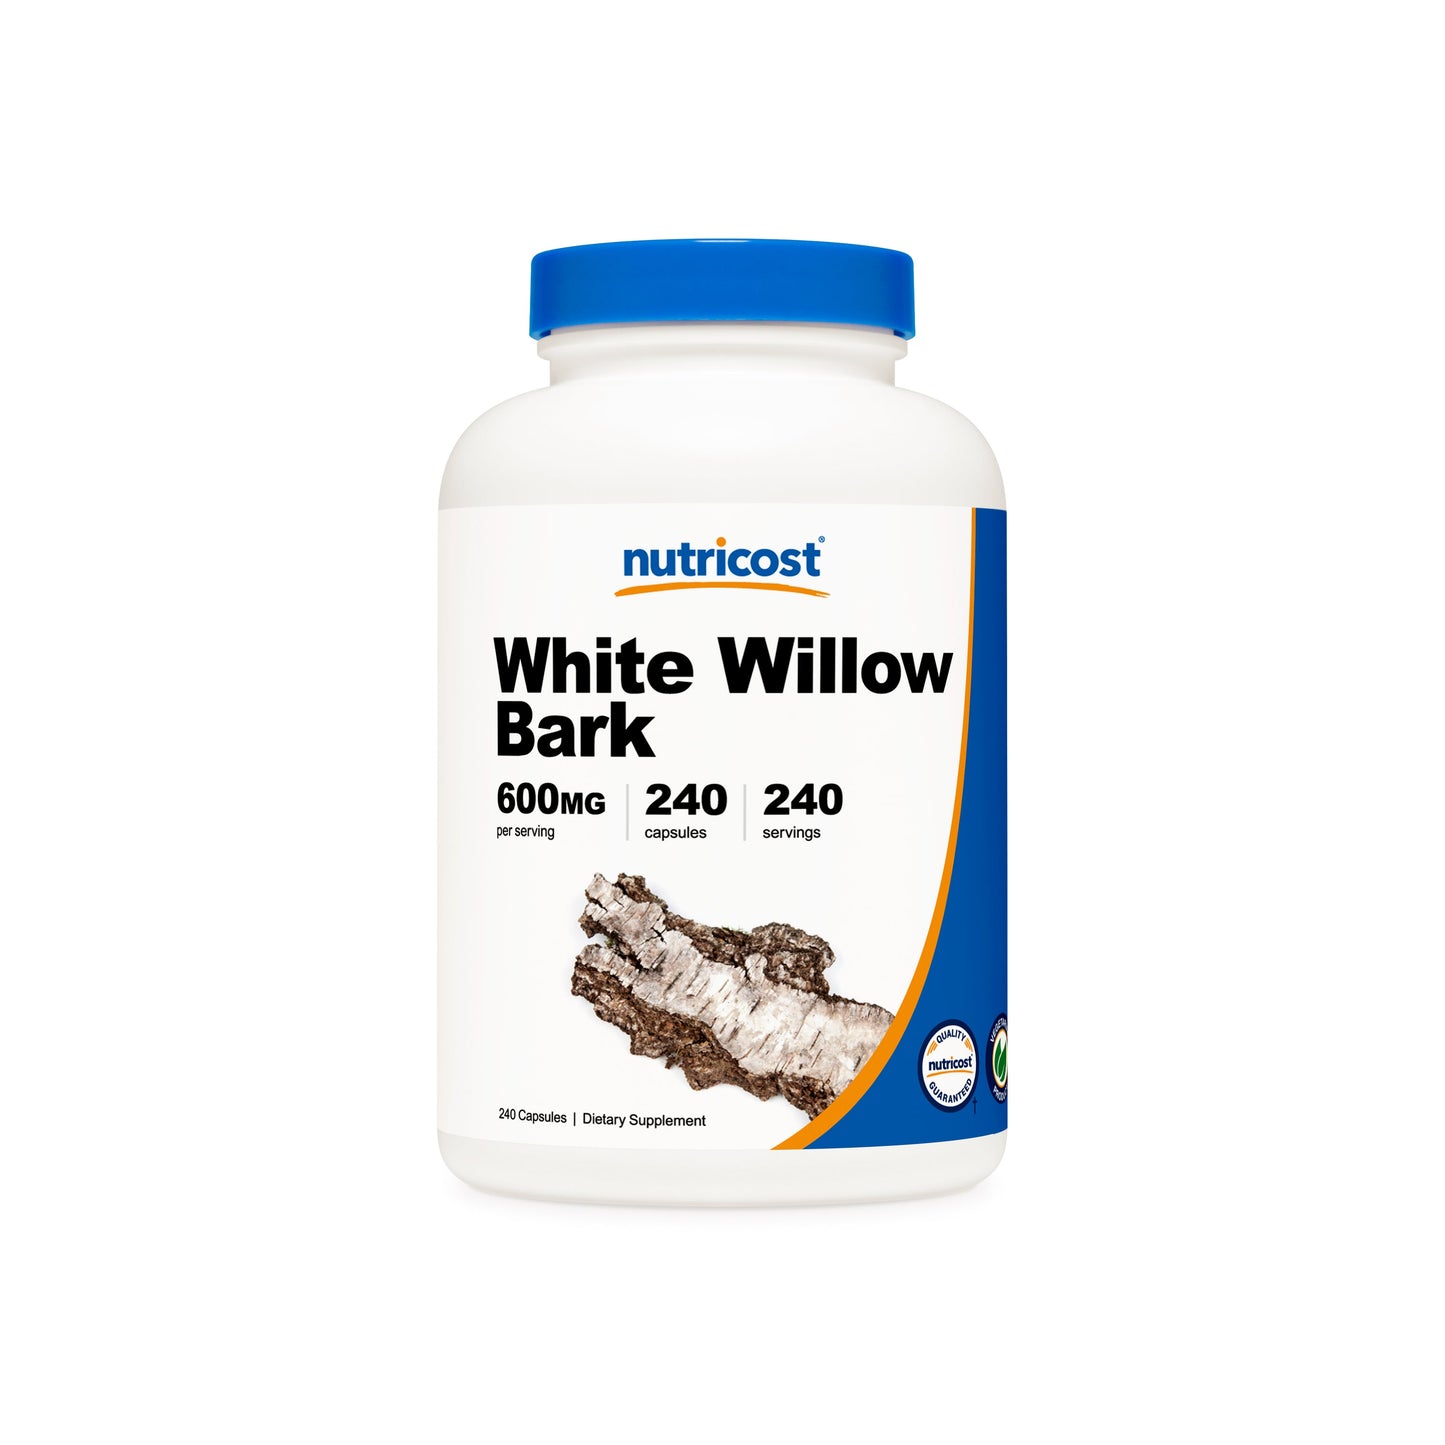 Nutricost White Willow Bark Capsules